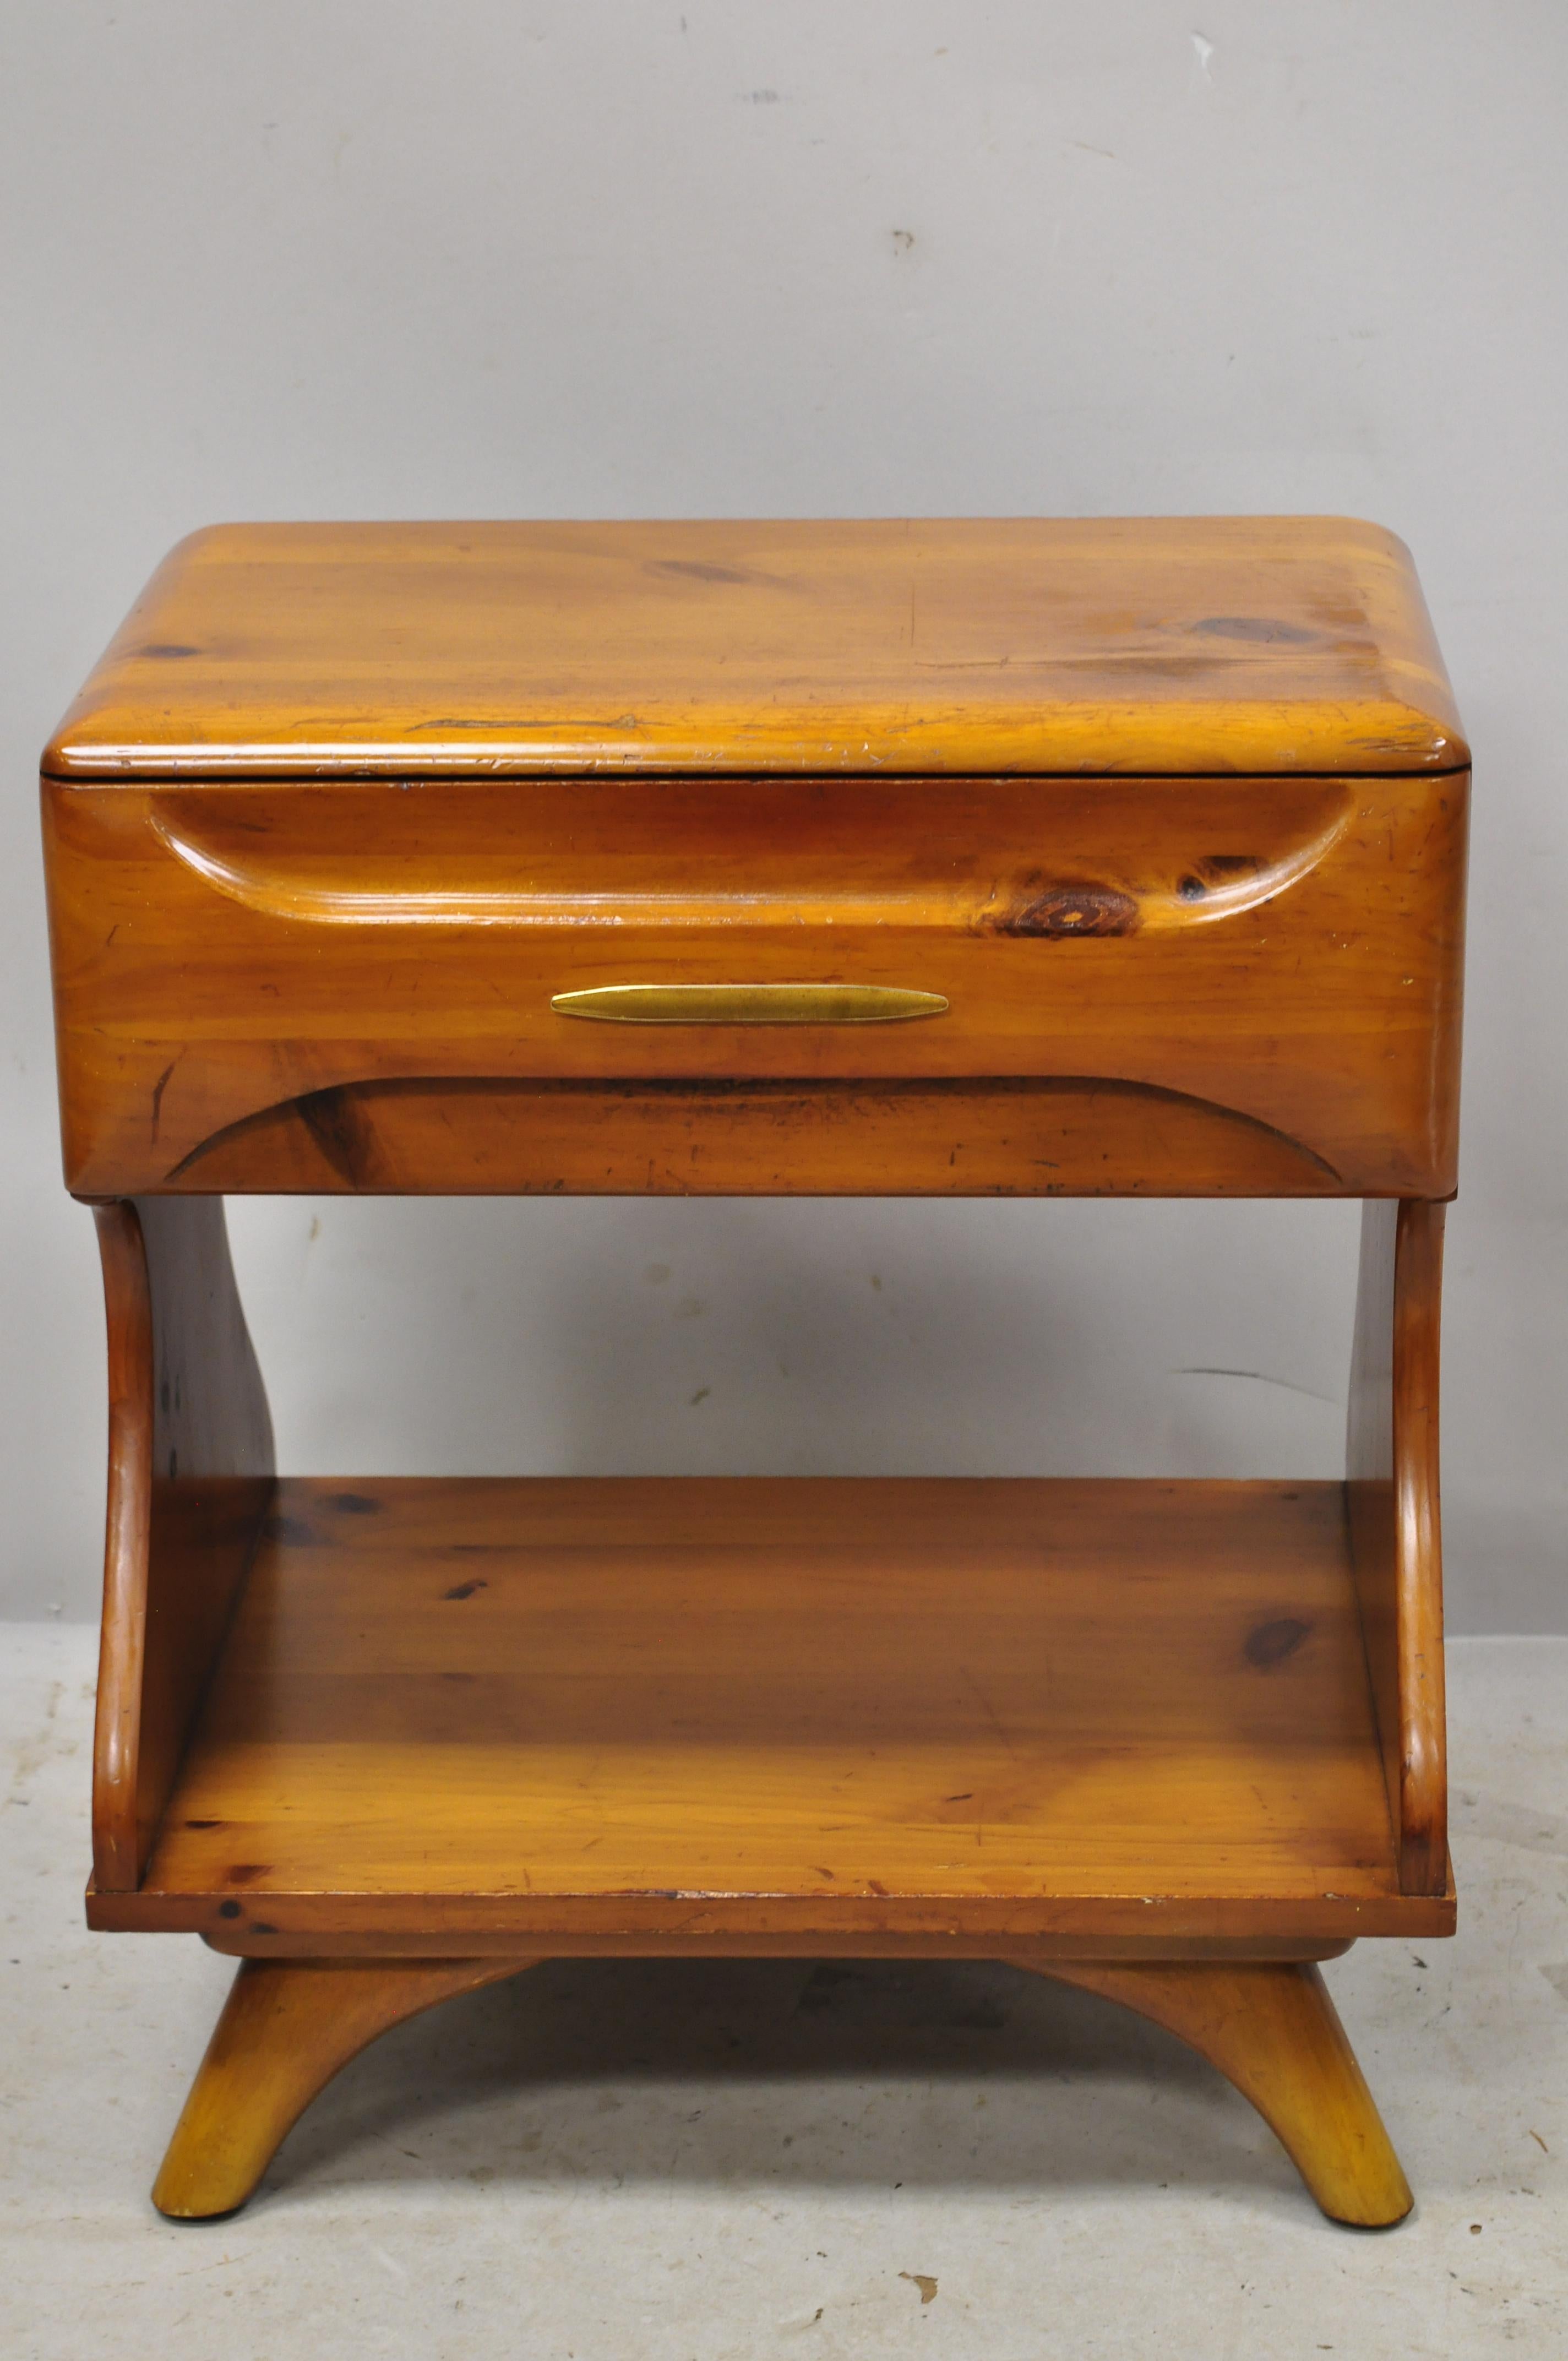 Mid-Century Modern Franklin Shockey sculptured pine wood one-drawer nightstand bedside table. Item features solid wood construction, beautiful wood grain, distressed finish, original label, 1-drawer, very nice vintage item, sleek sculptural form,